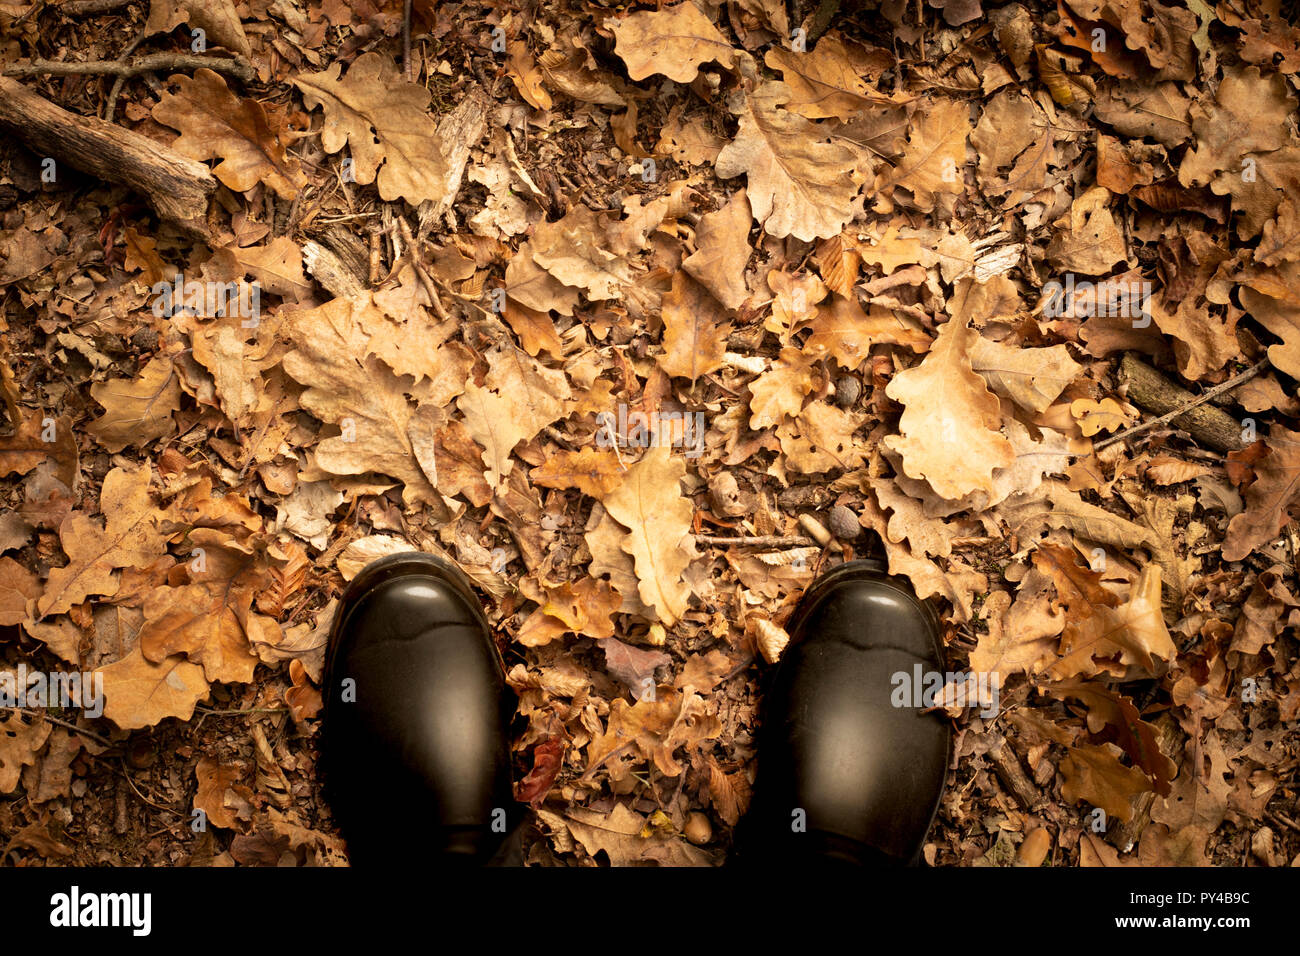 Top view of black rubber rain boots on fallen leaves covered ground. Autumn bakground, wallpaper. Stock Photo